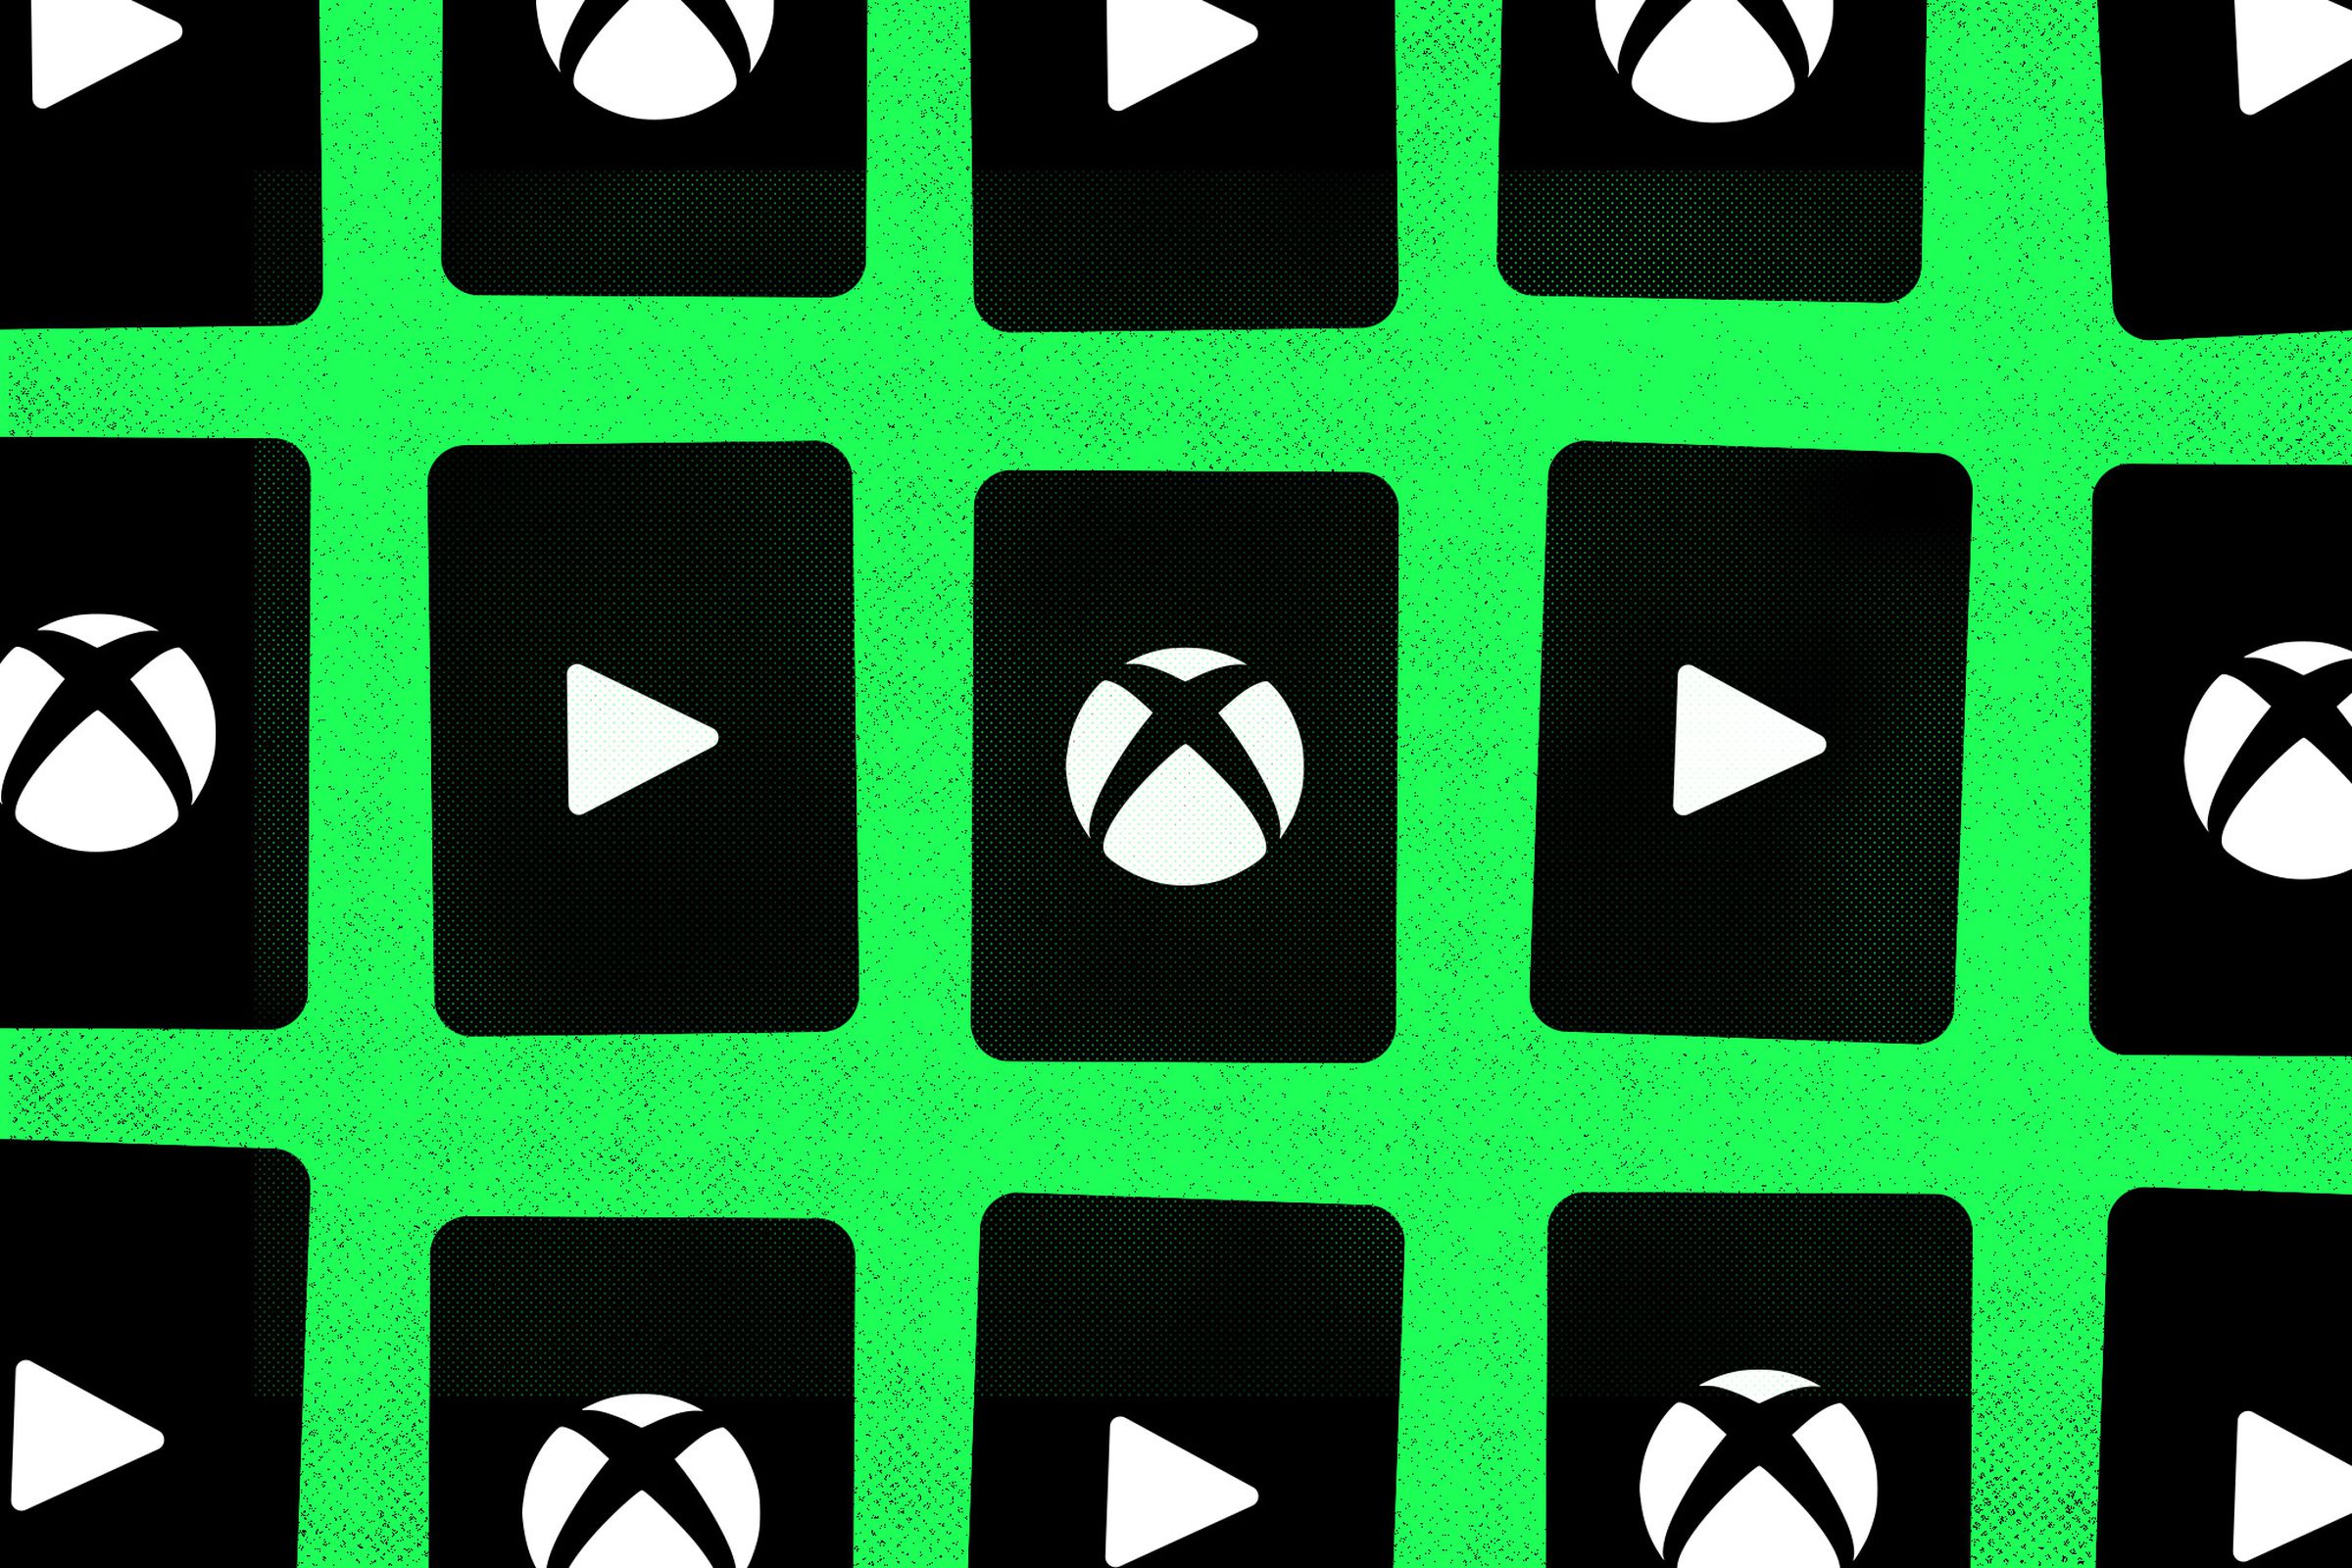 Illustration of Xbox and play logos